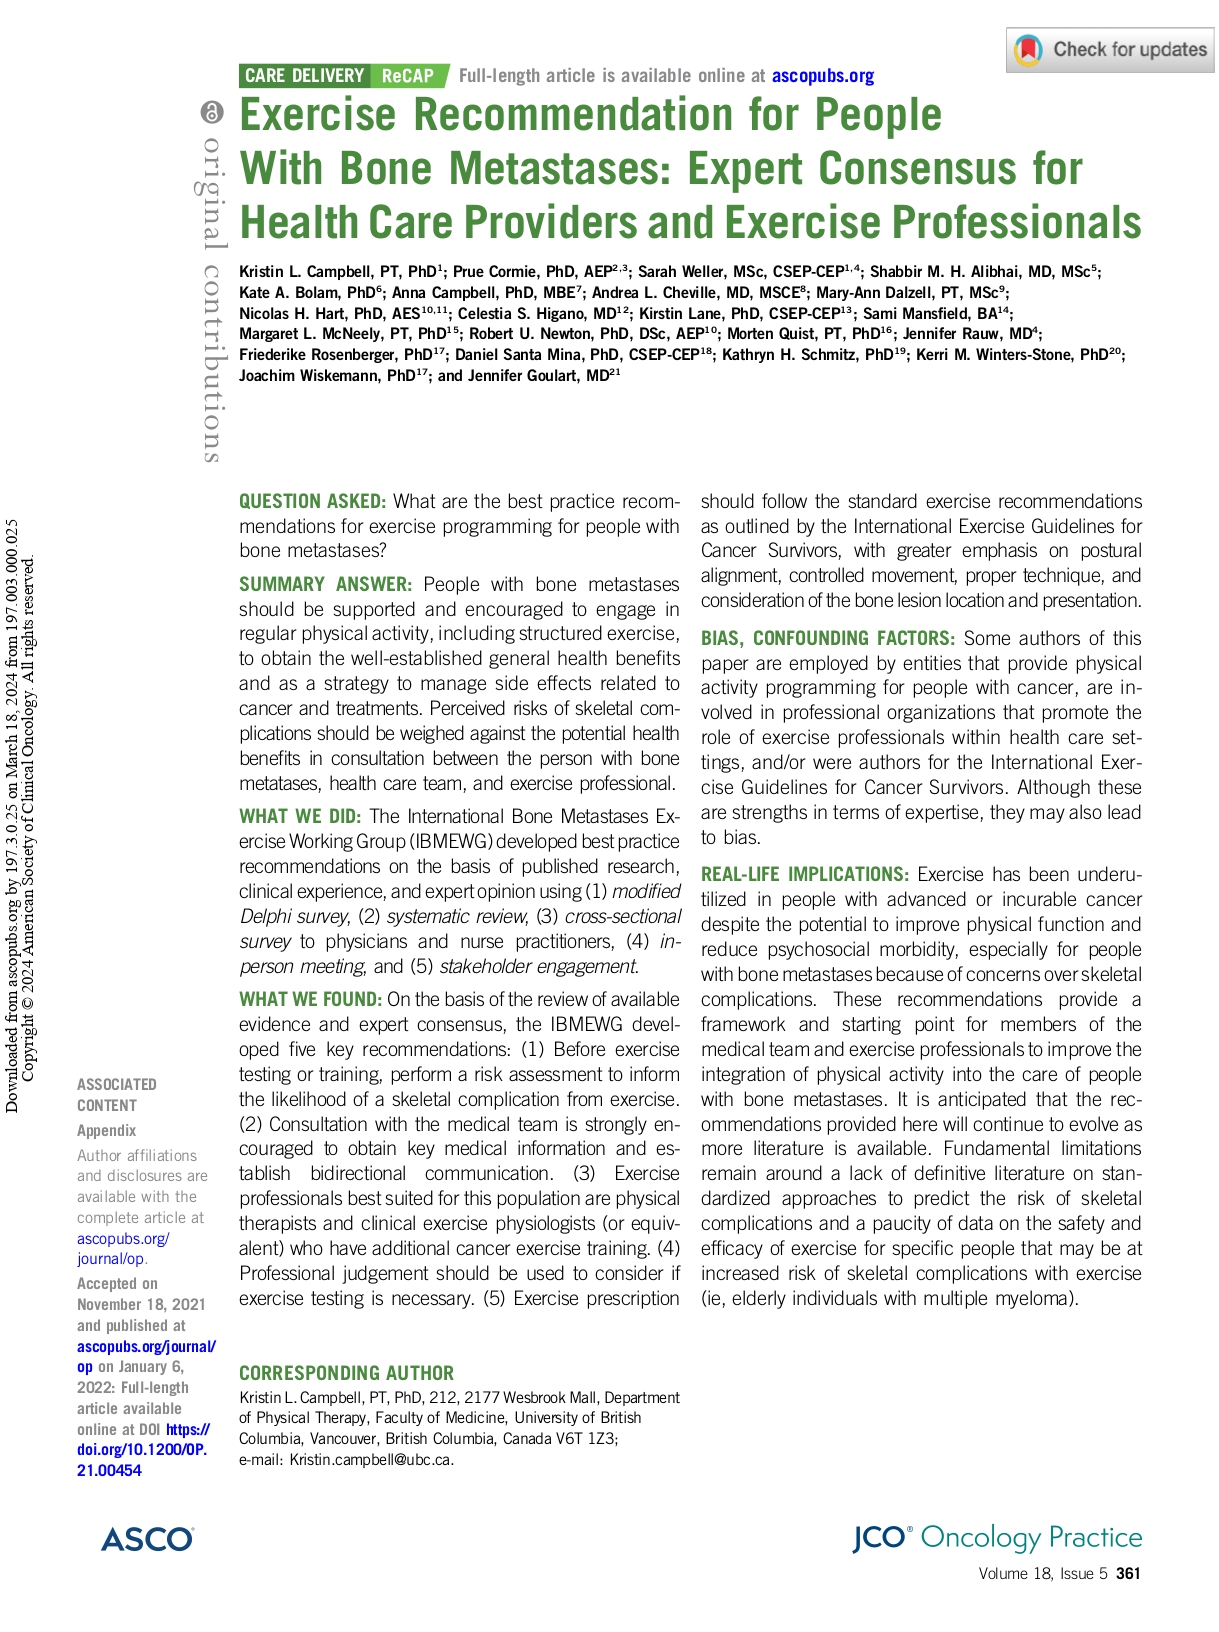 Exercise Recommendation for People With Bone Metastases: Expert Consensus for Health Care Providers and Exercise Professionals (2022)